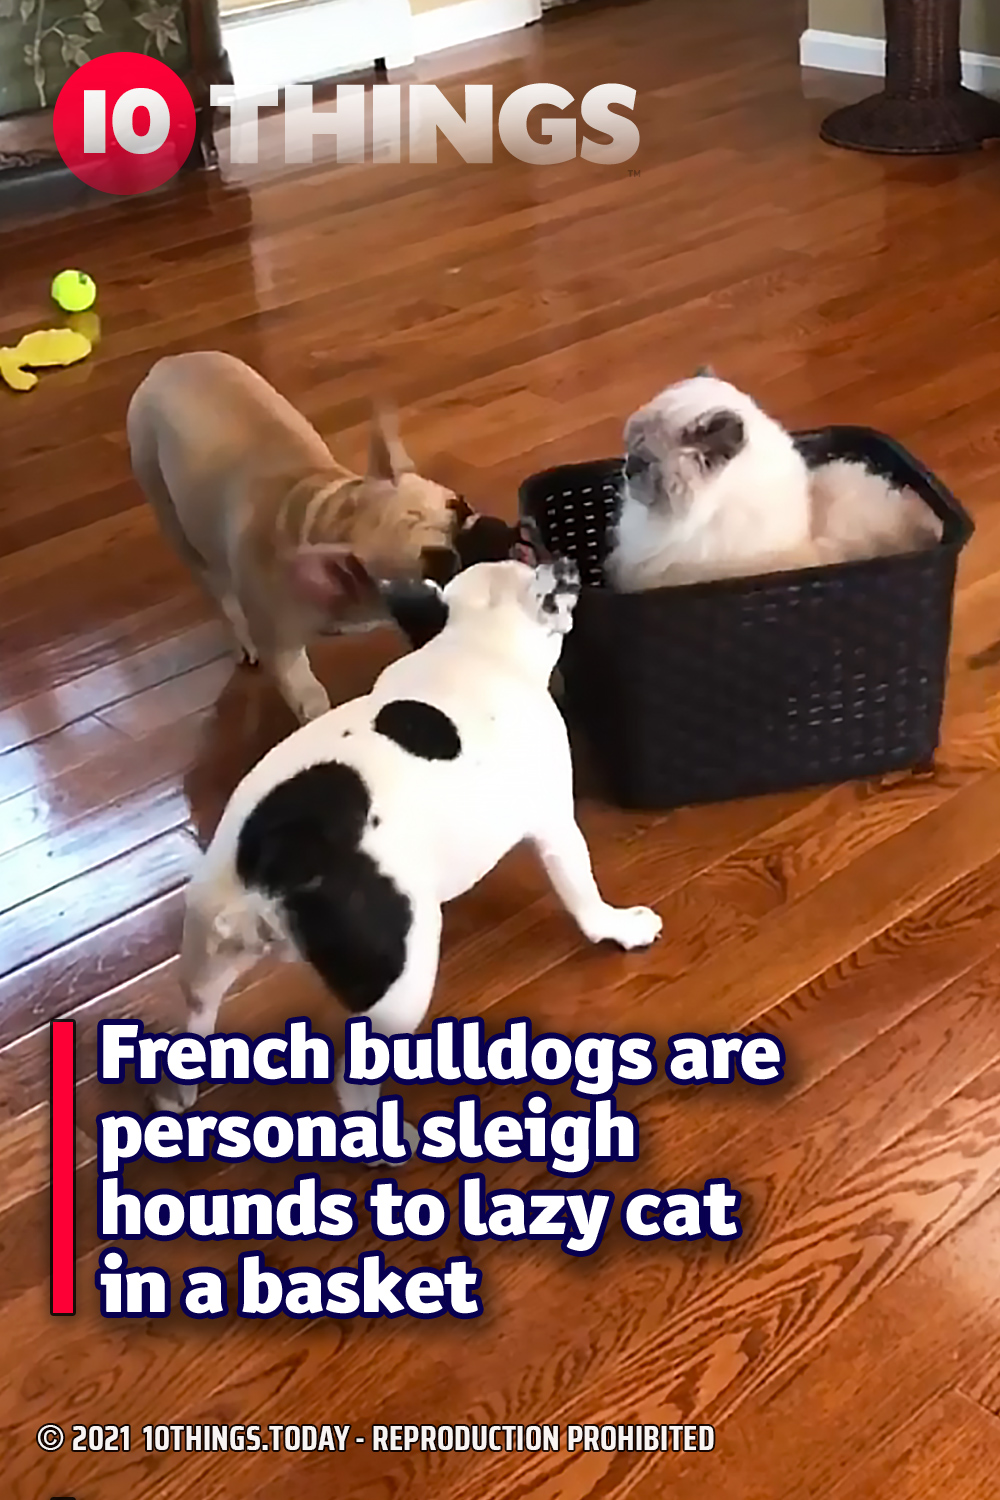 French bulldogs are personal sleigh hounds to lazy cat in a basket